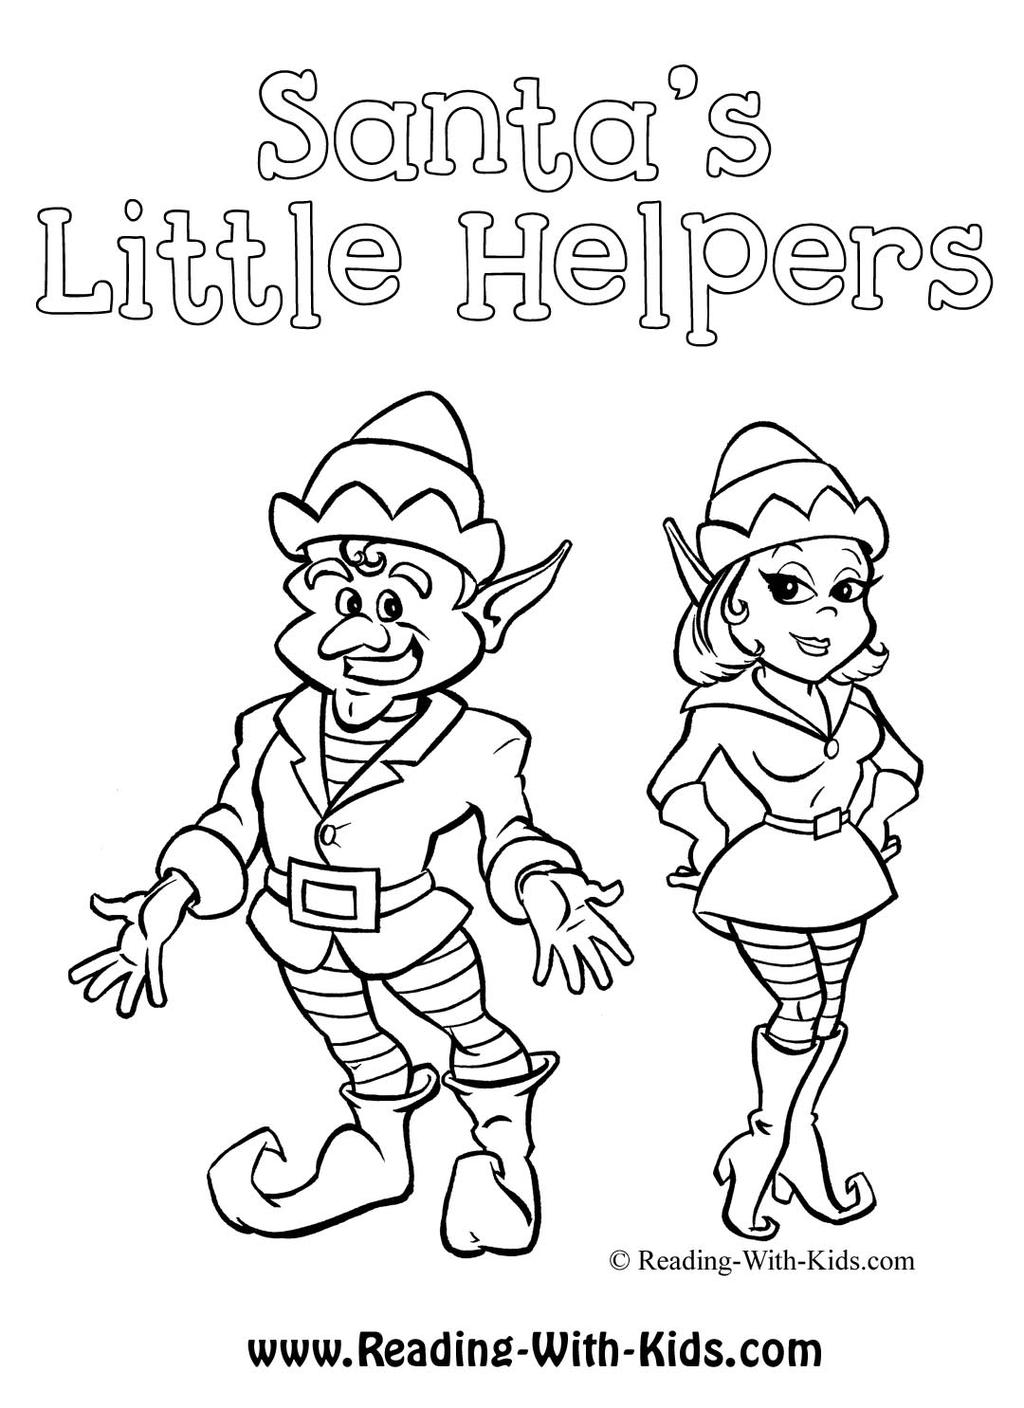 Free Santa s Little Helpers Coloring Pages printable